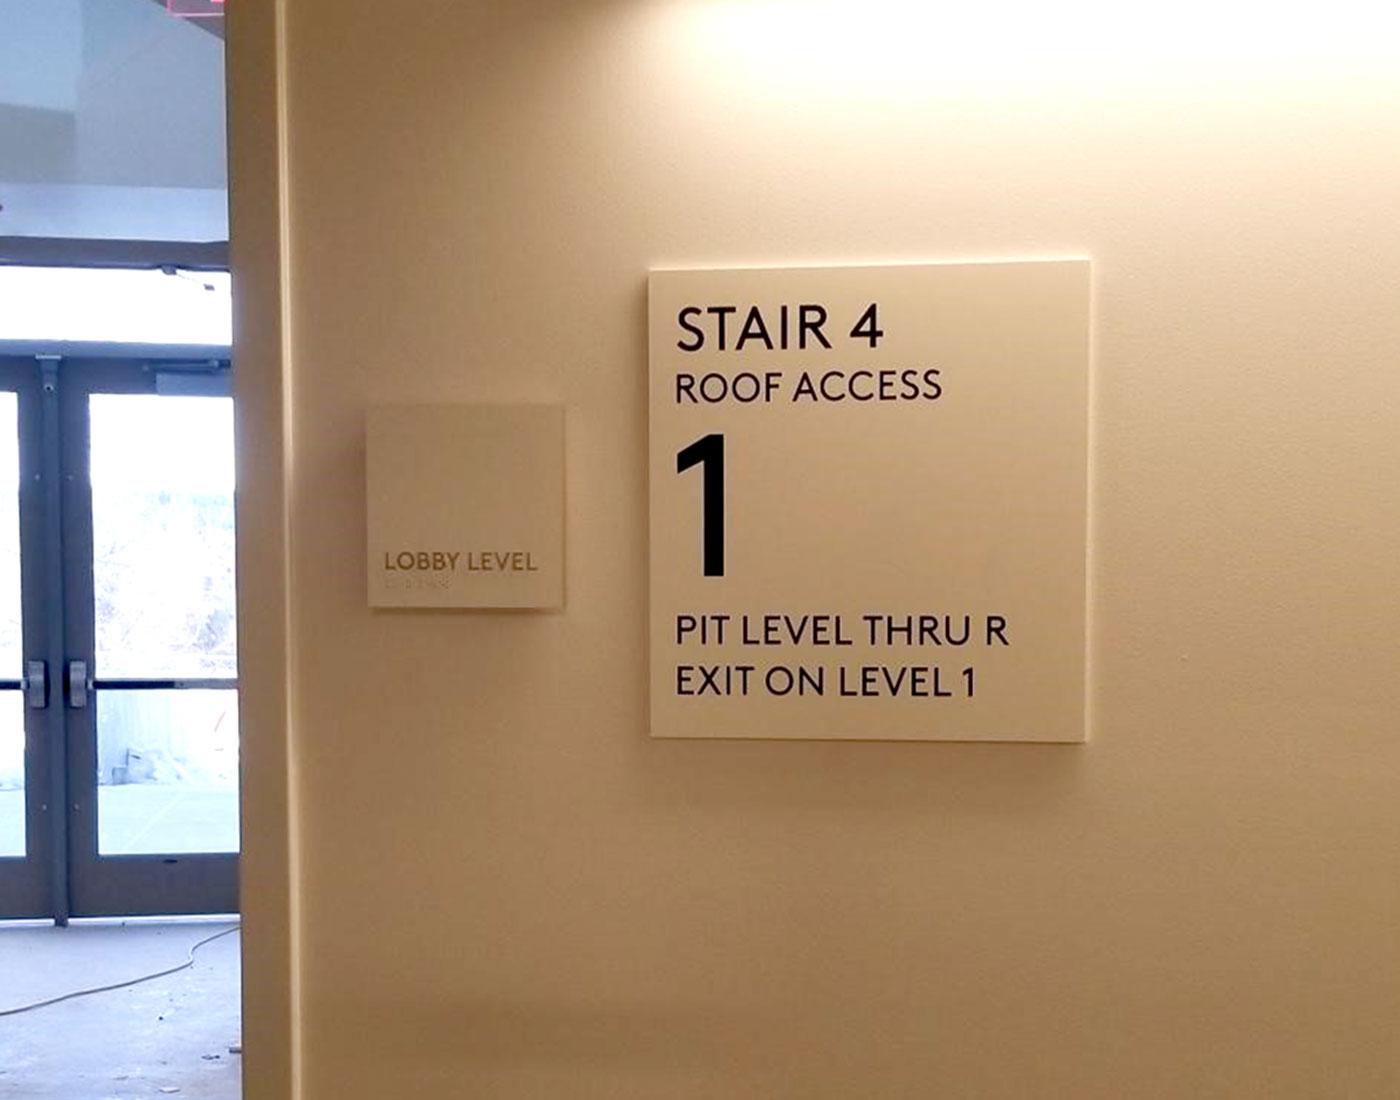 ADA Code signage and way finding being installed on all interior rooms and levels inside the center.